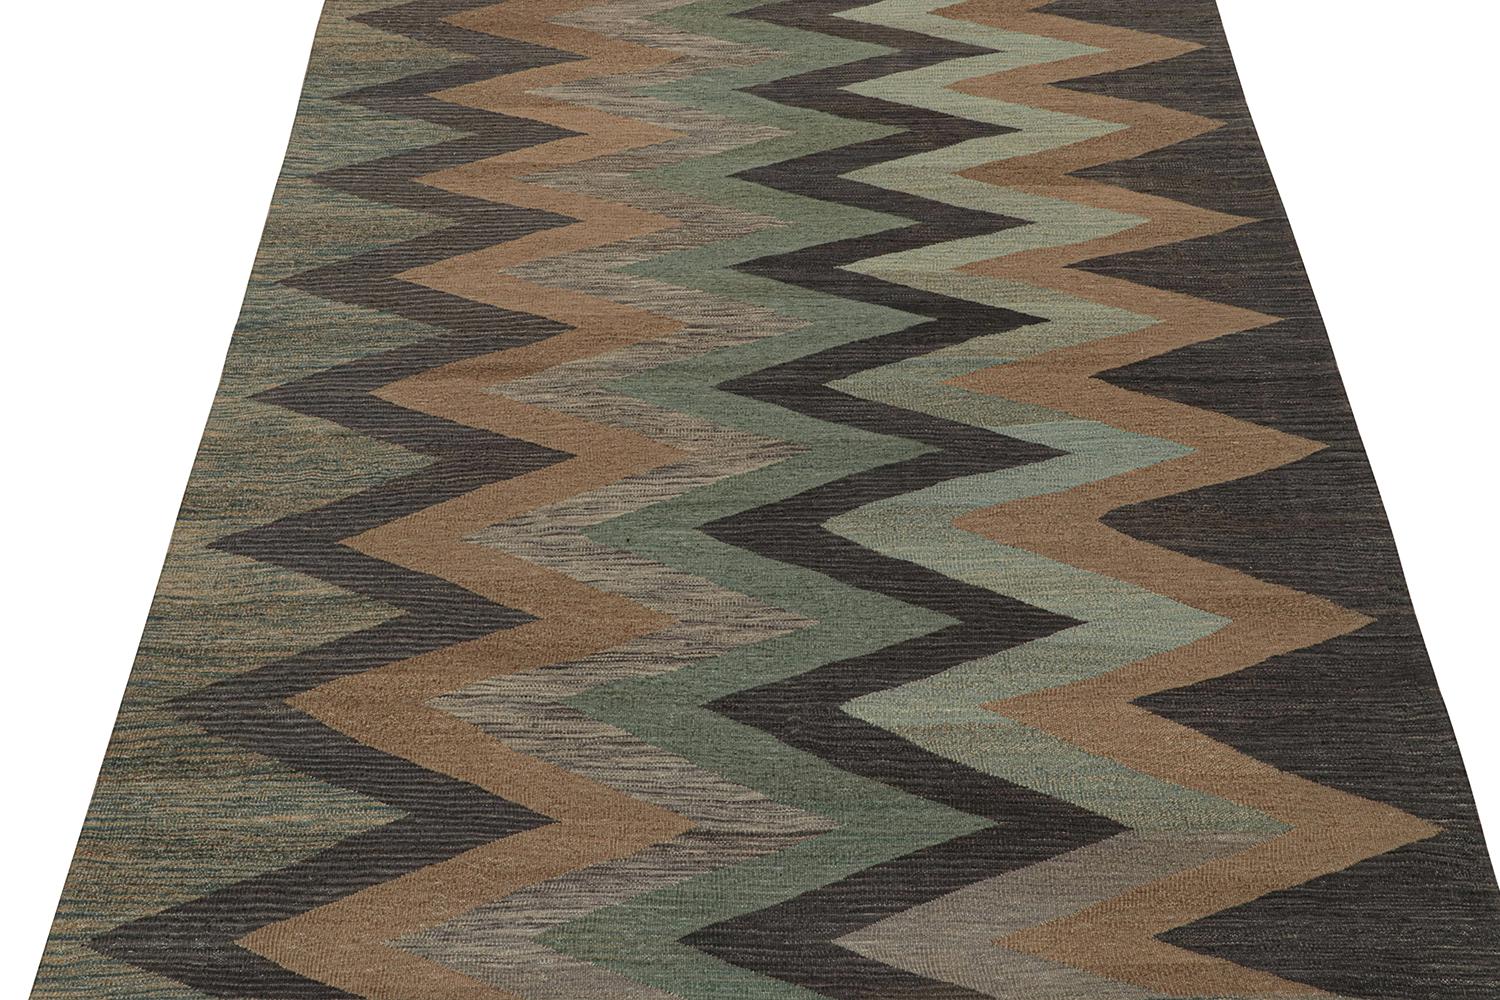 Vintage Persian Kilim in Brown and Teal Chevron Patterns by Rug & Kilim In Good Condition For Sale In Long Island City, NY